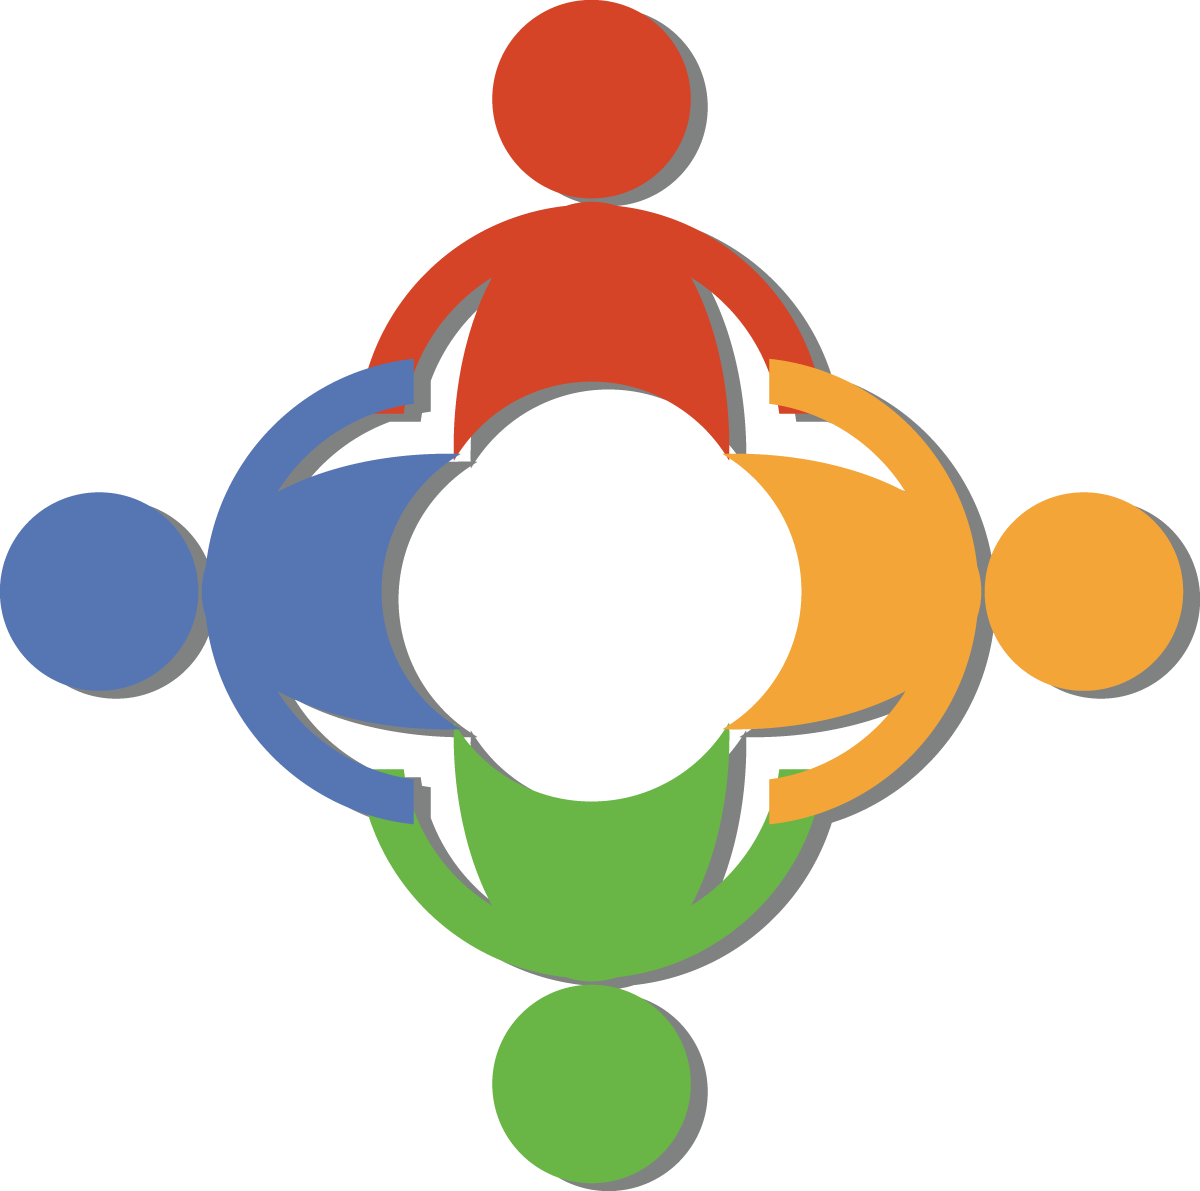 four stylized figures holding hands in a circle